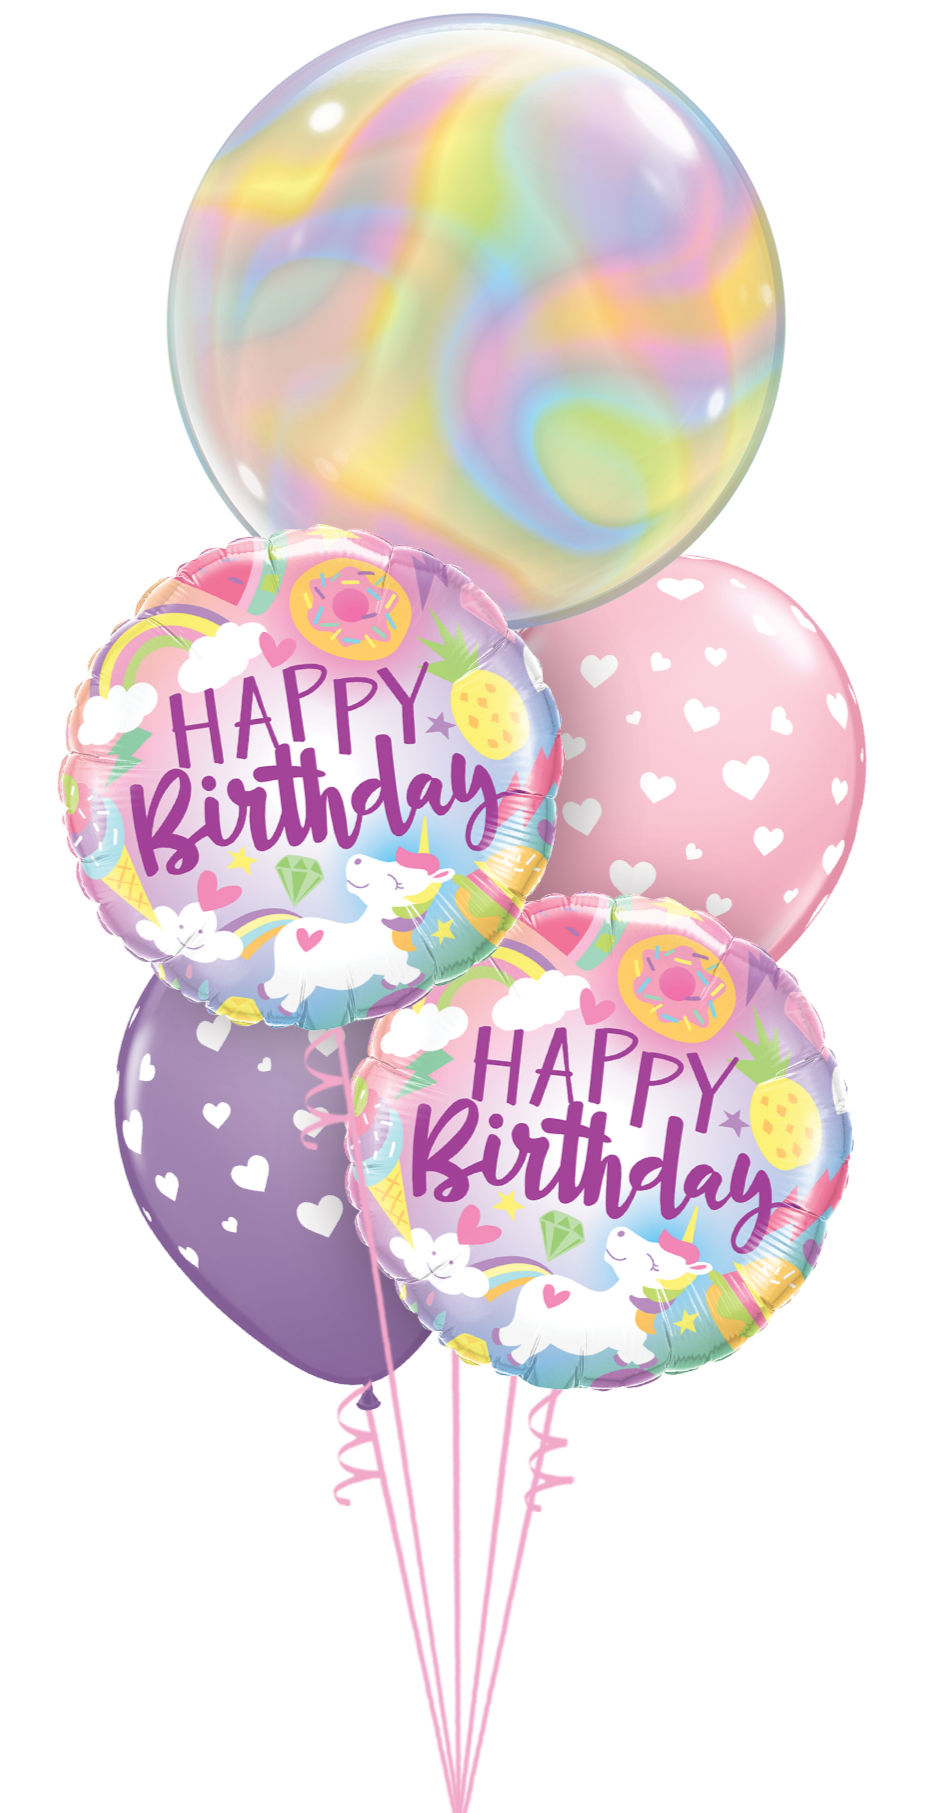 Have a Fanciful & Fun Birthday!